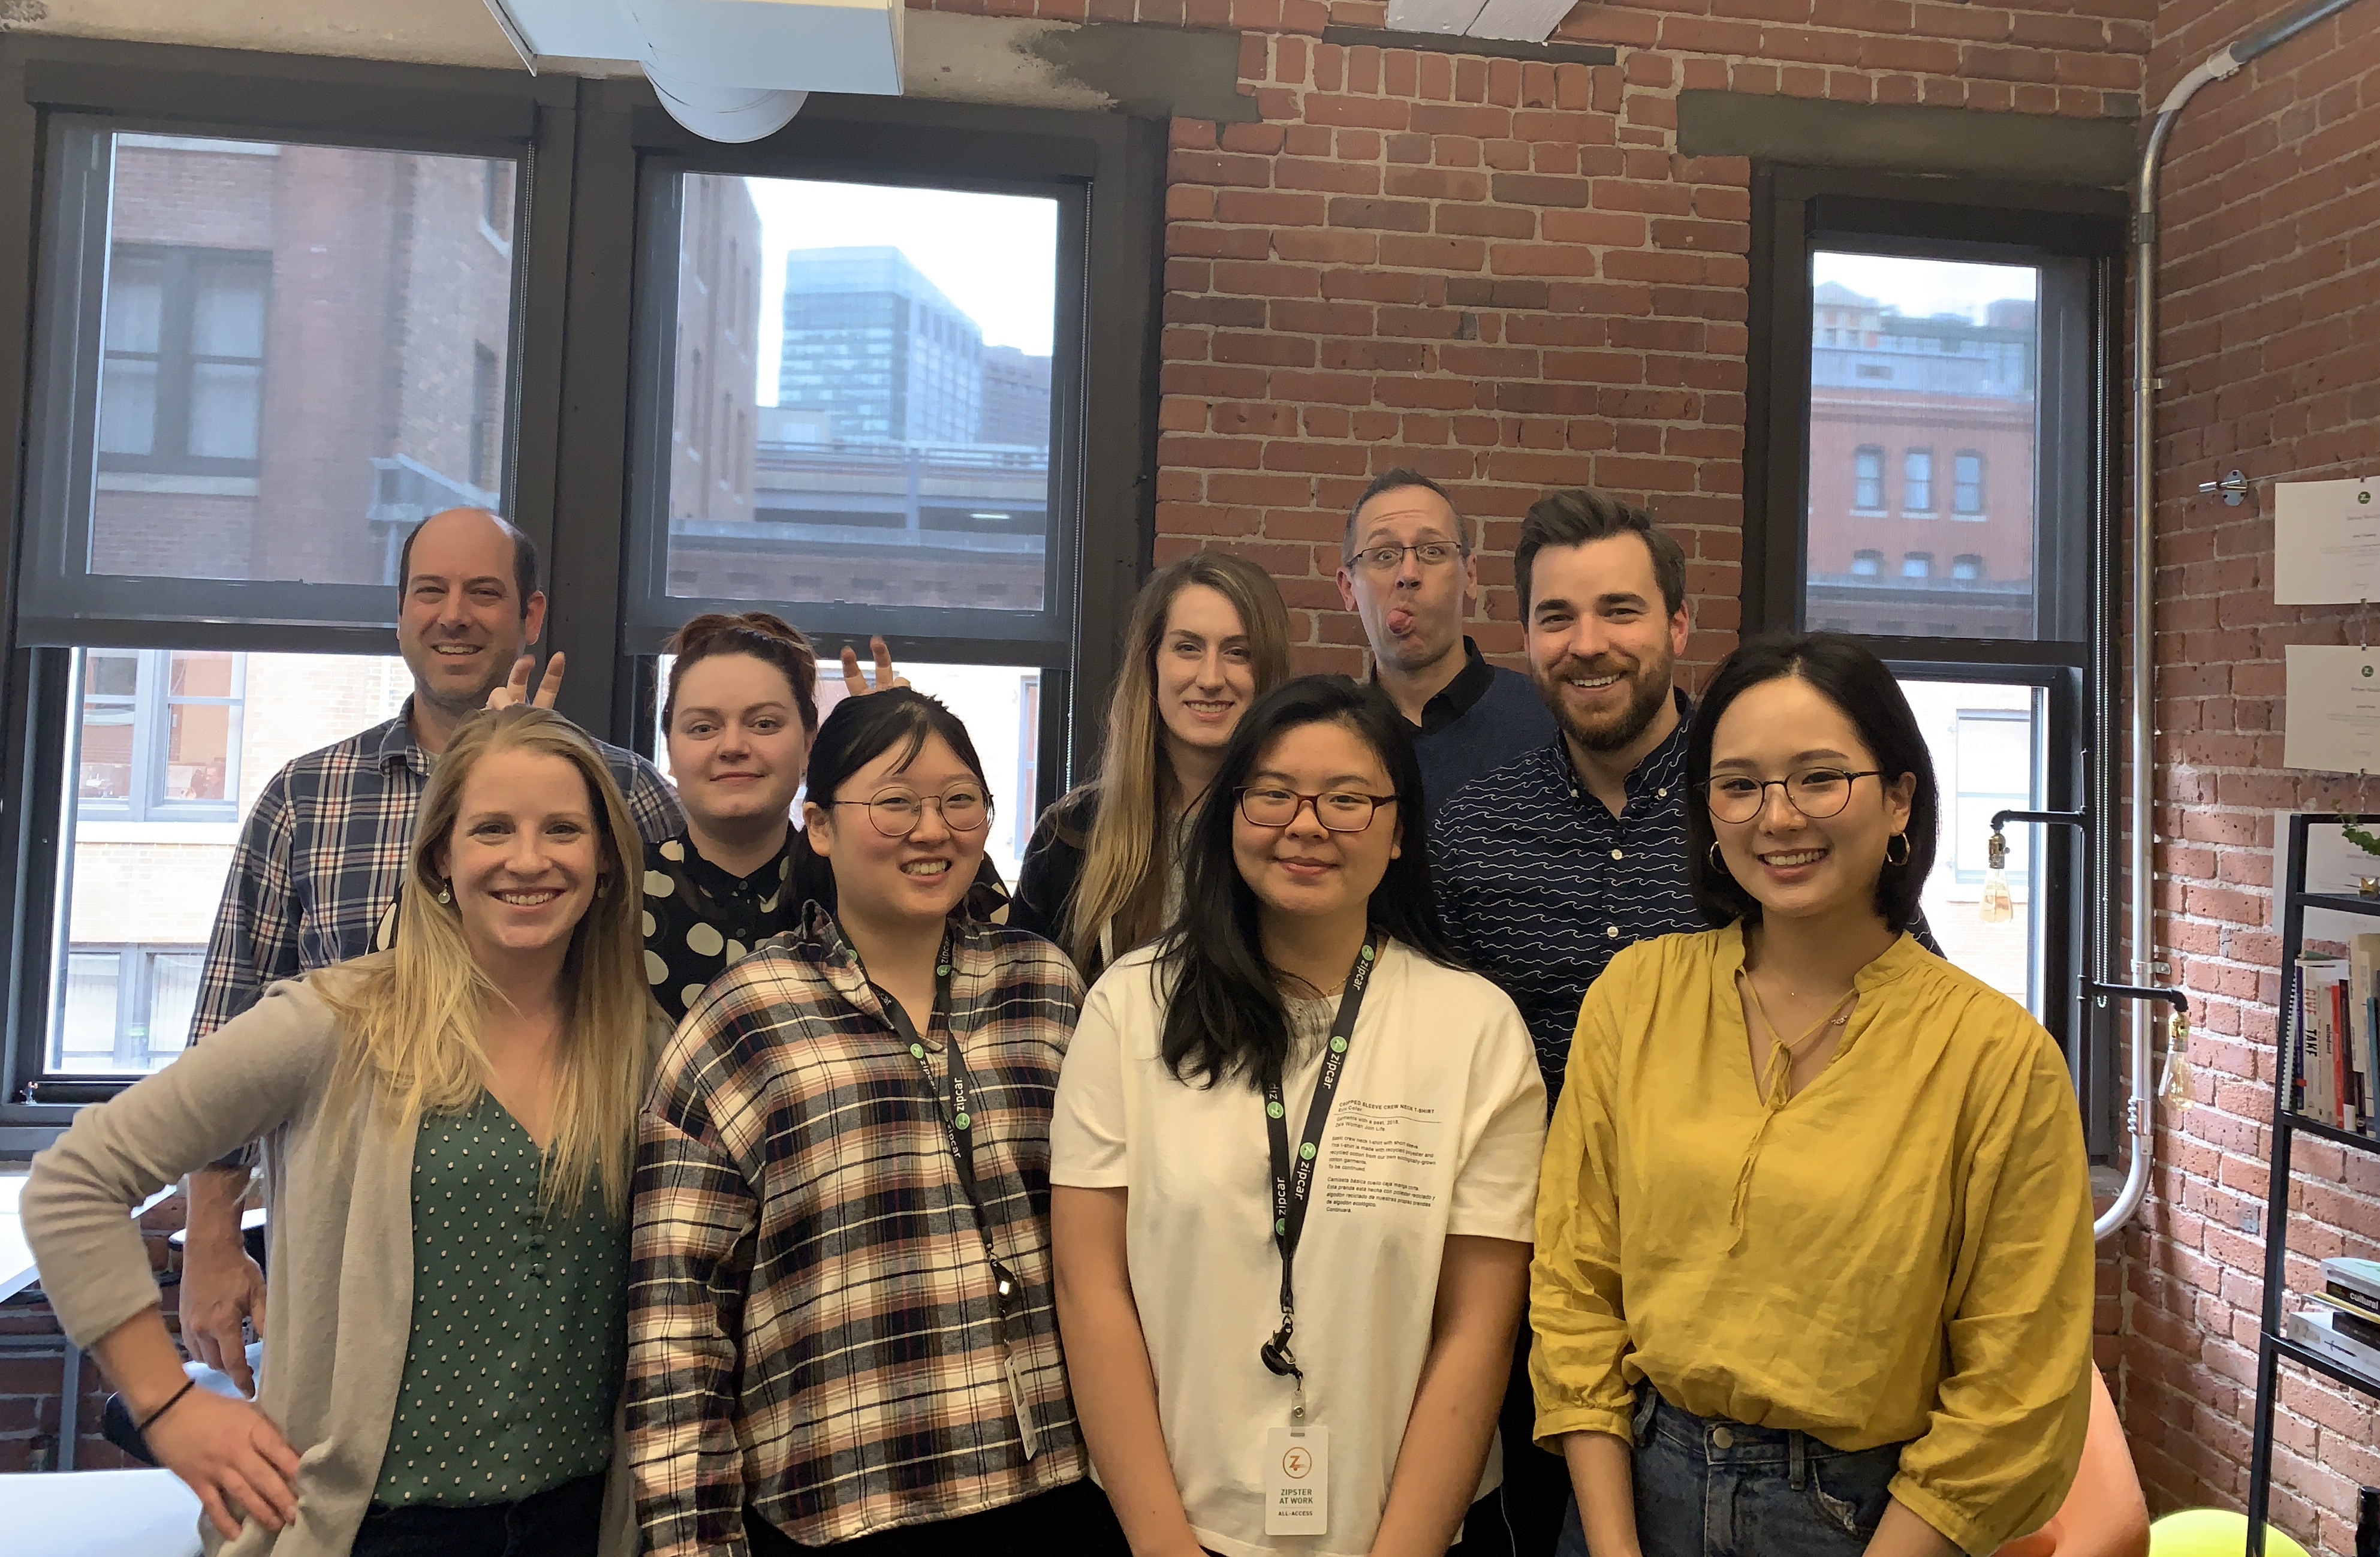 A photo of me and the 2019 UX Design team at Zipcar!